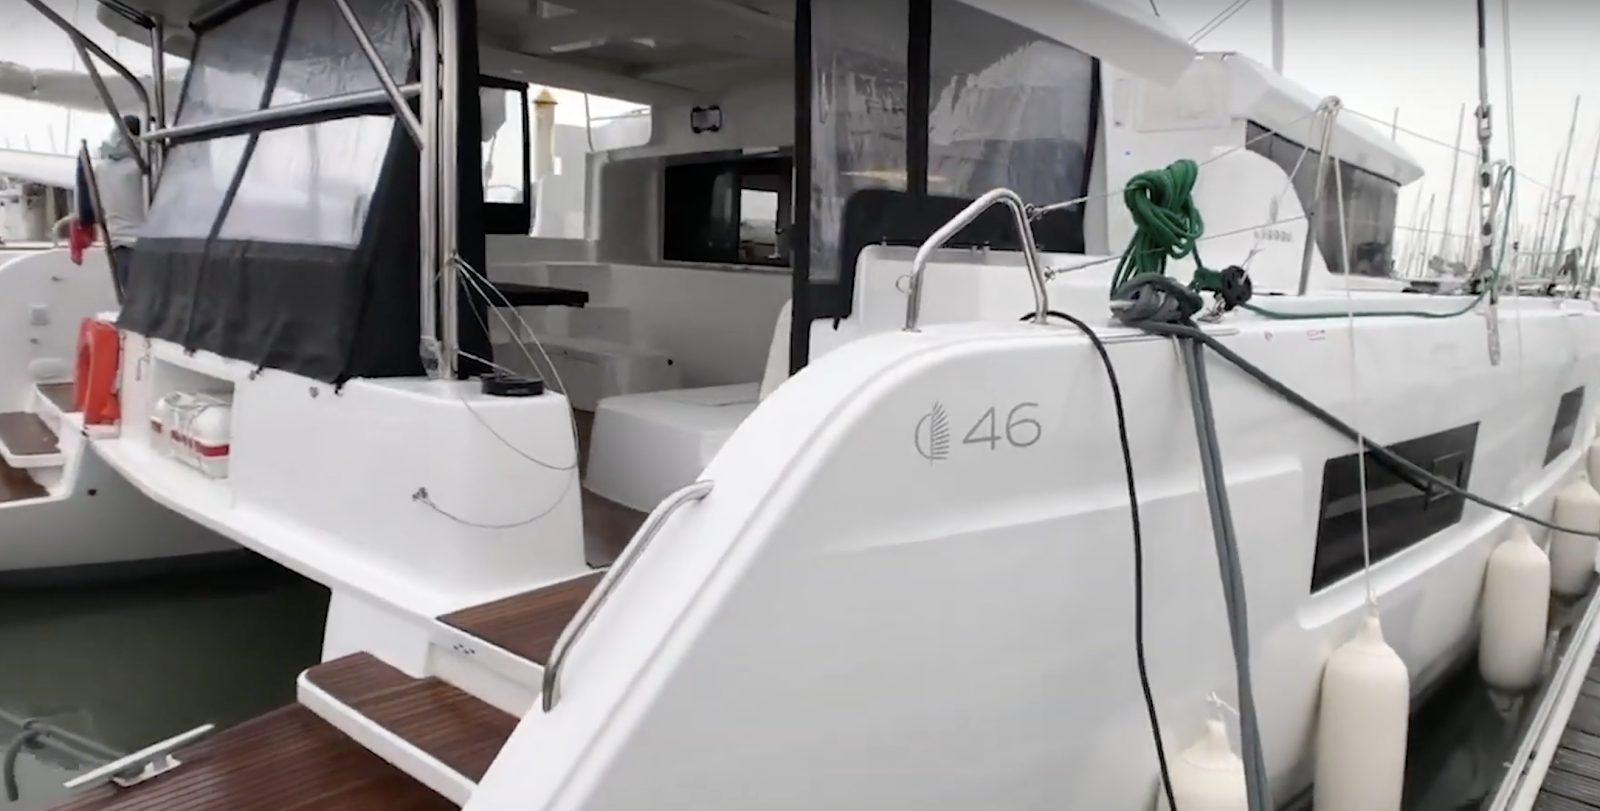 World premiere of the brand new Lagoon 46